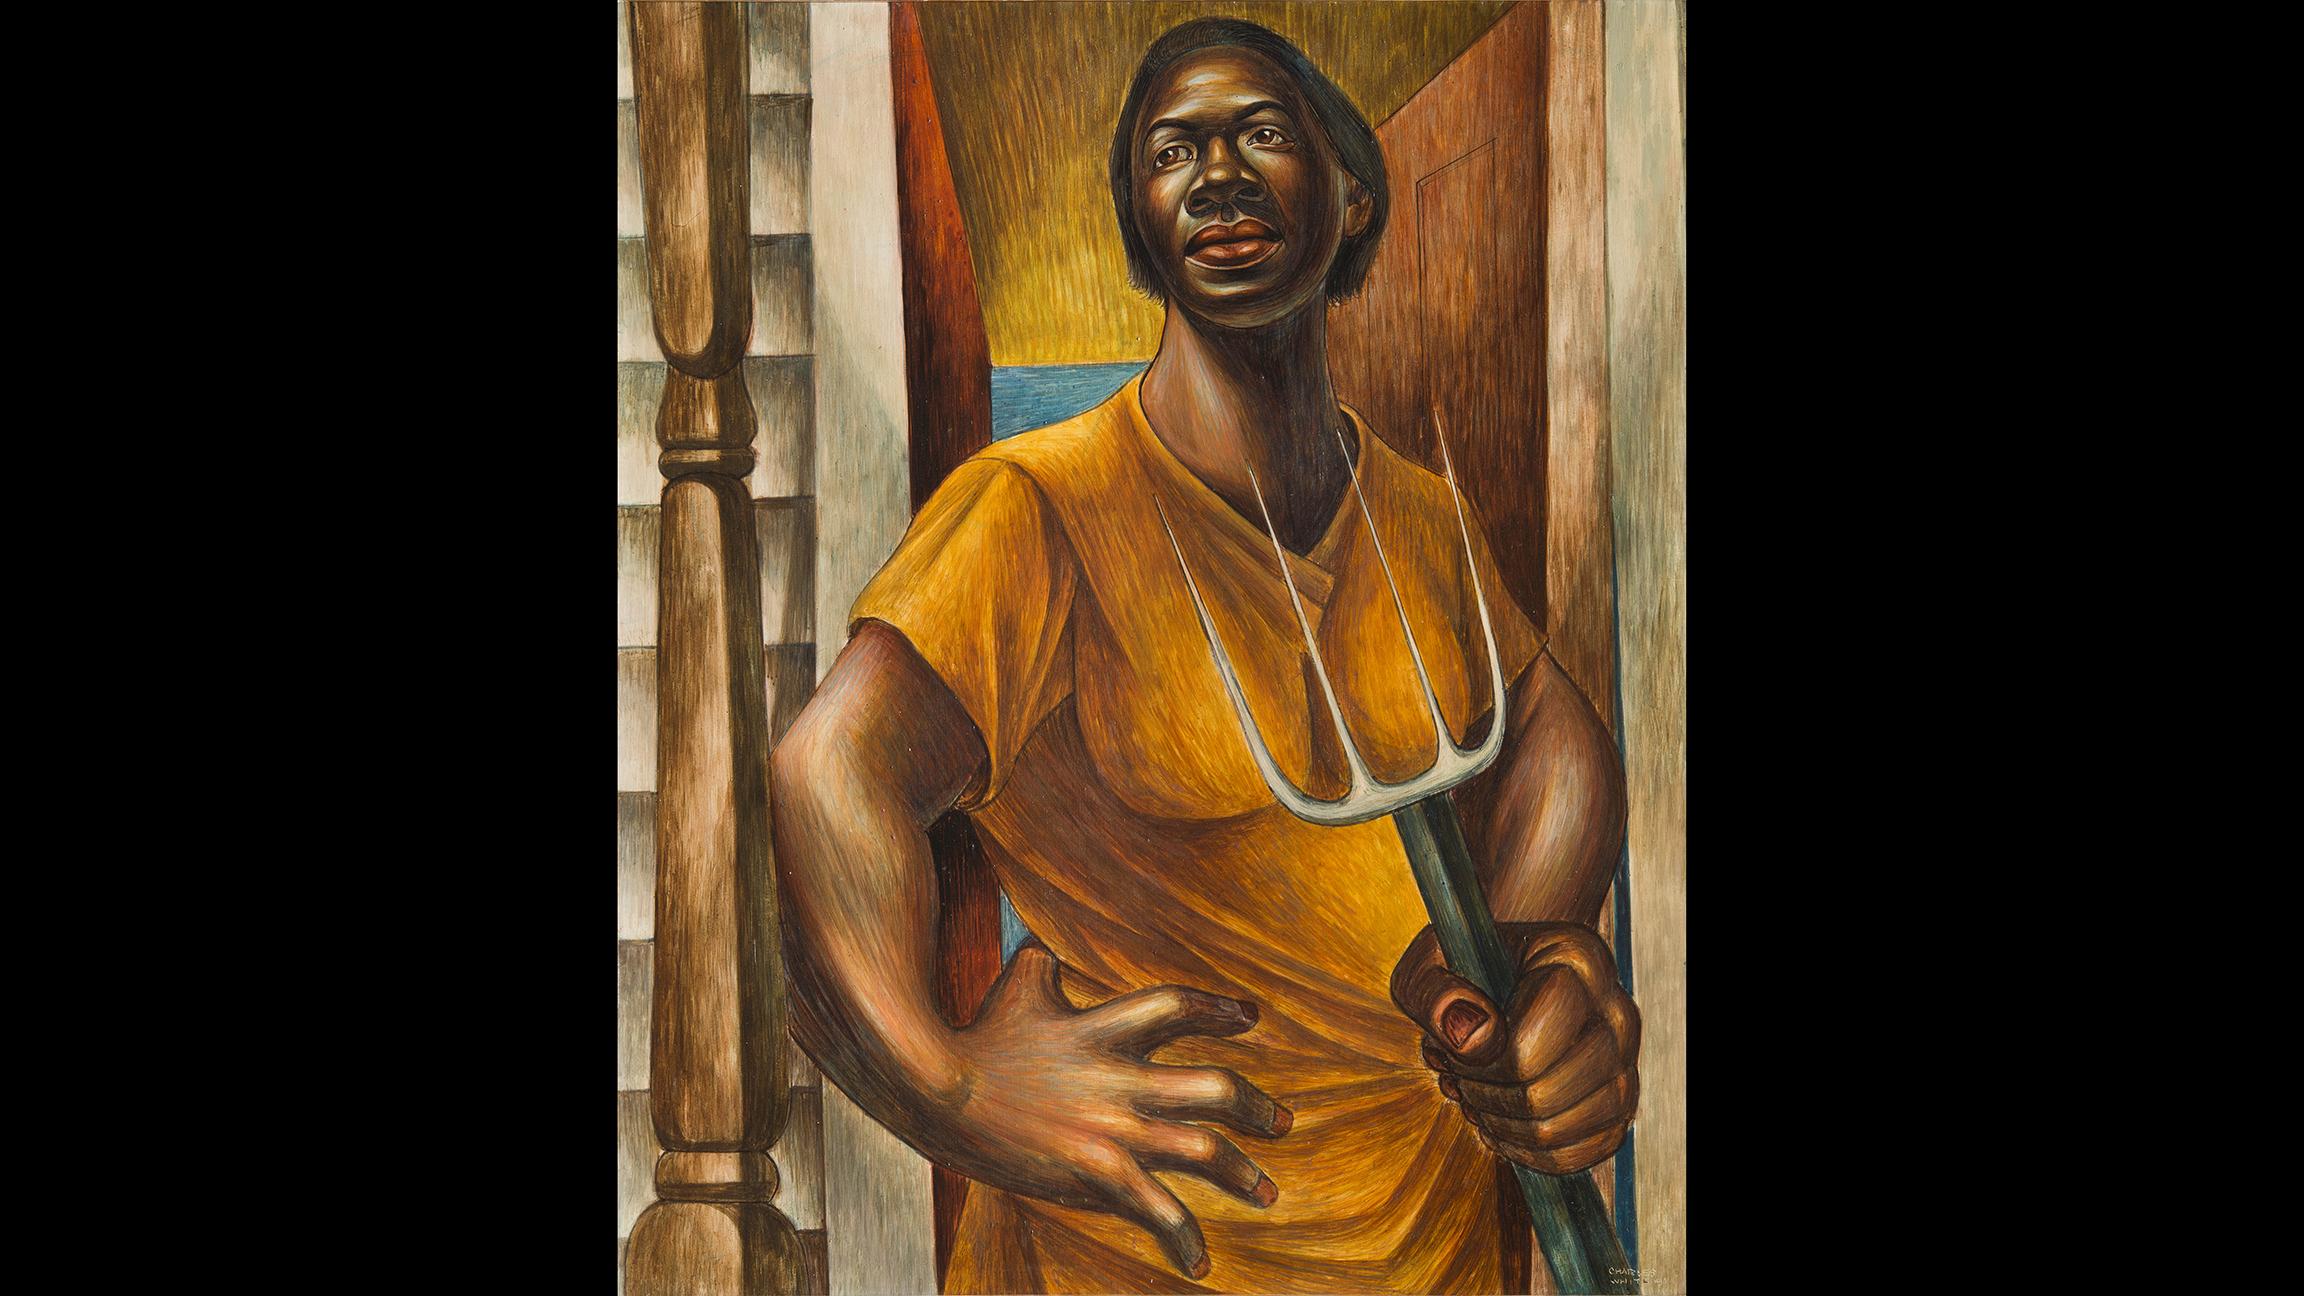 Charles White. “Our Land,” 1951. Private Colllection. (© The Charles White Archives Inc.)